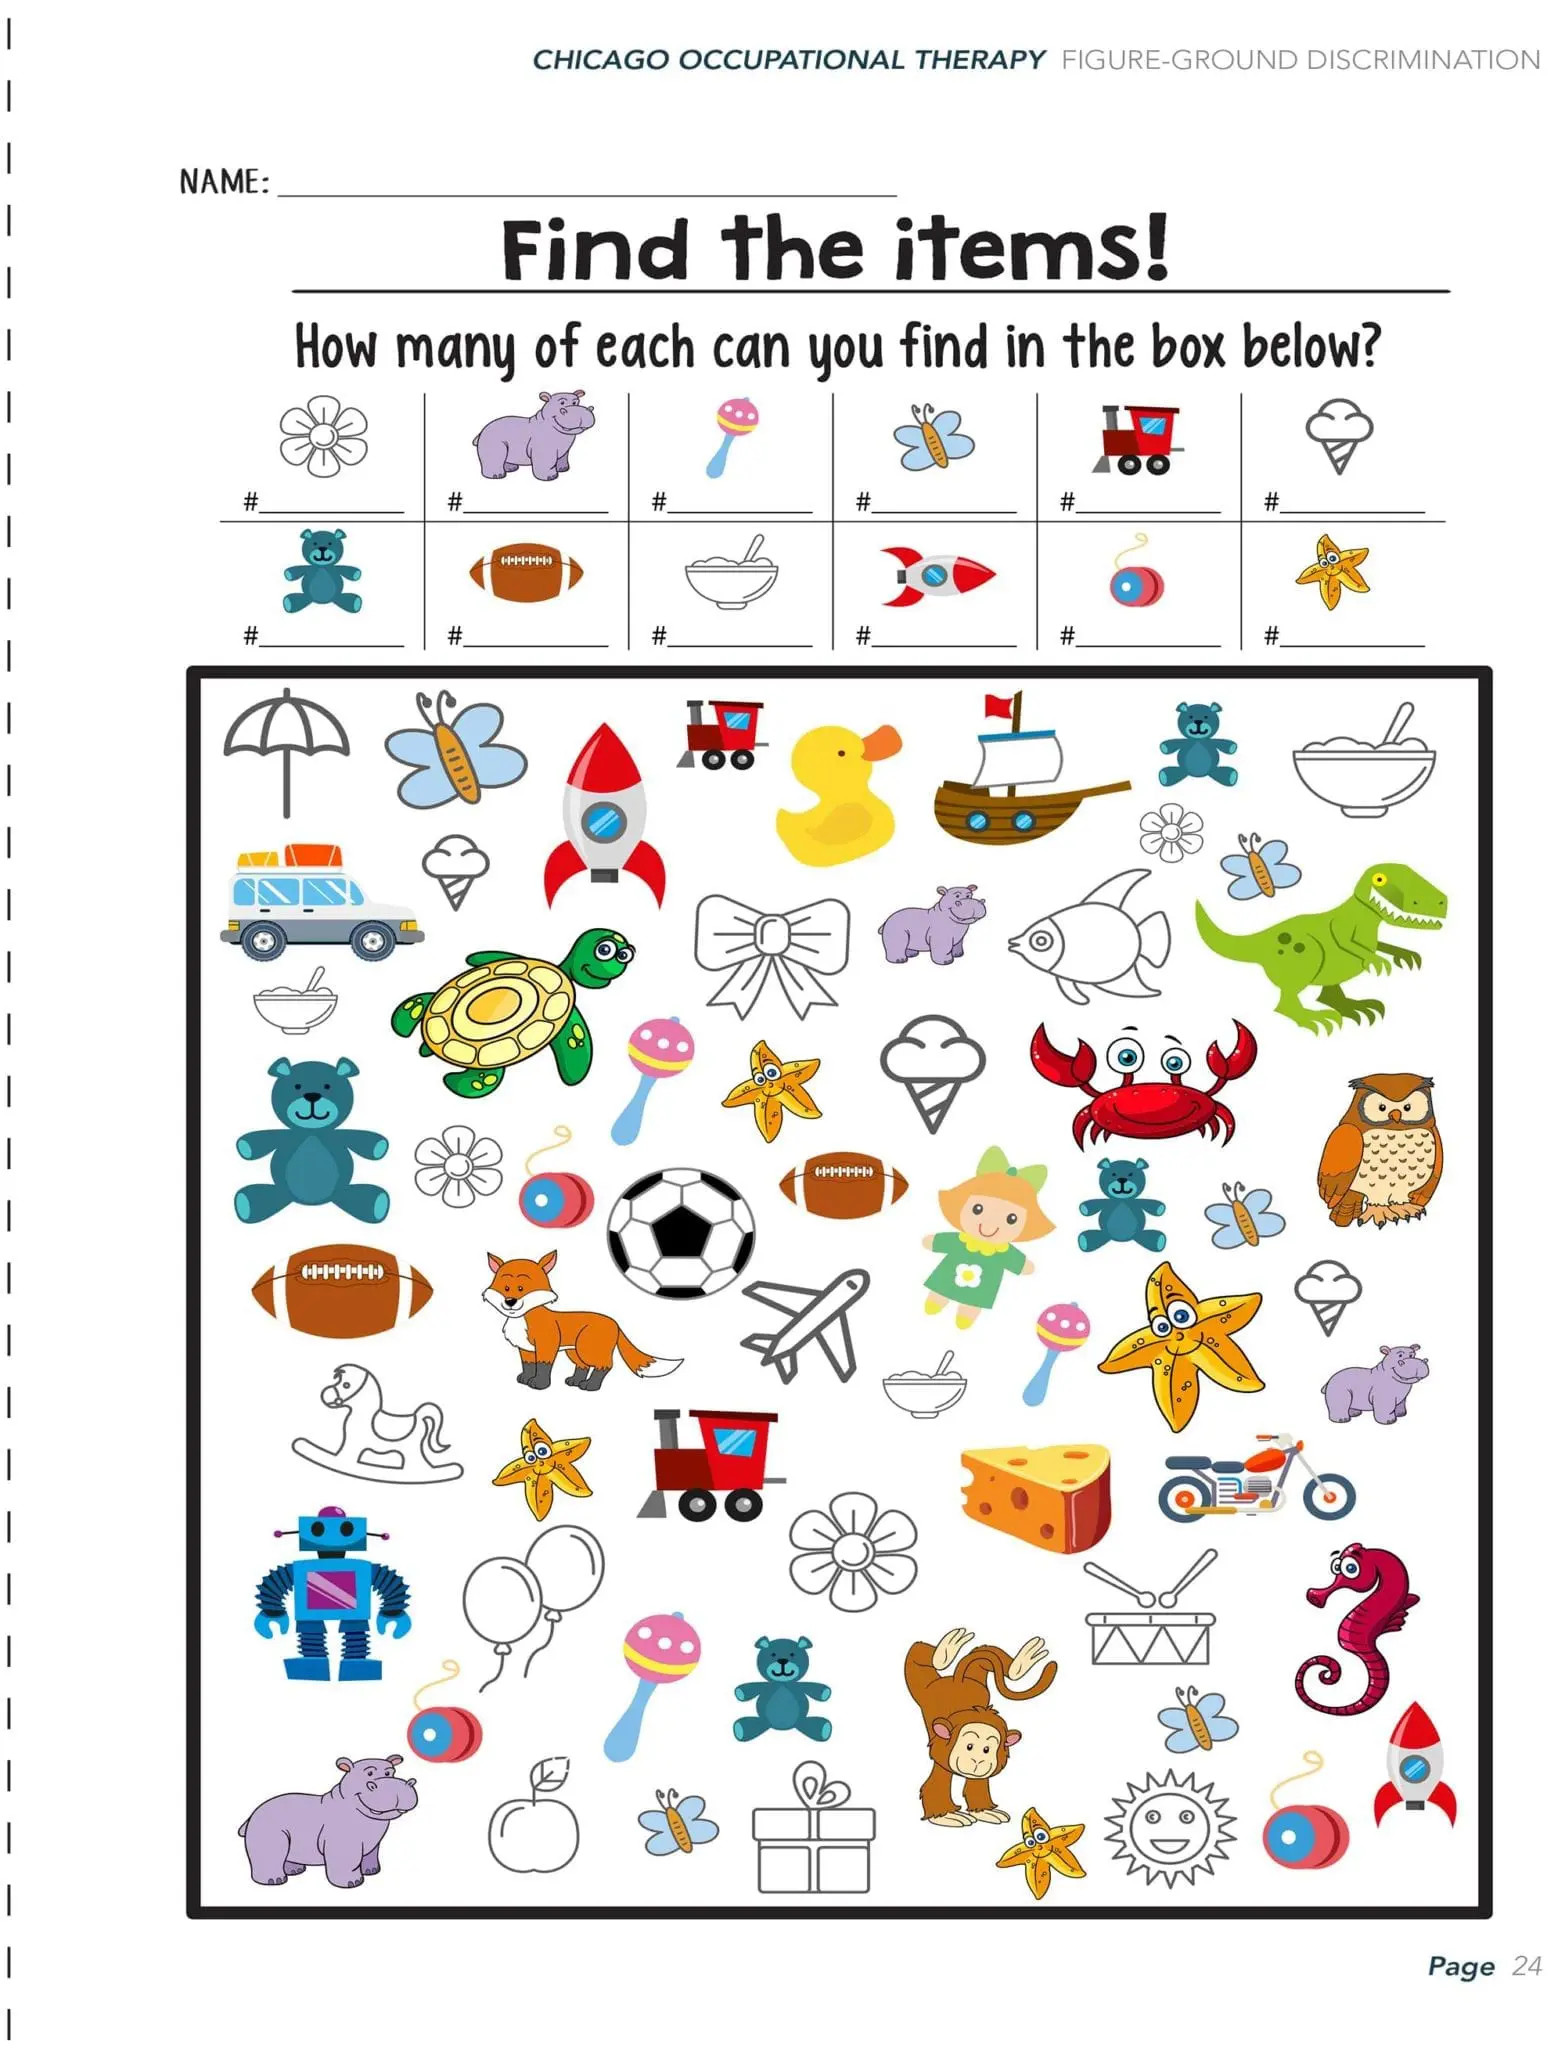 visual-perceptual-activity-worksheets-chicago-occupational-therapy